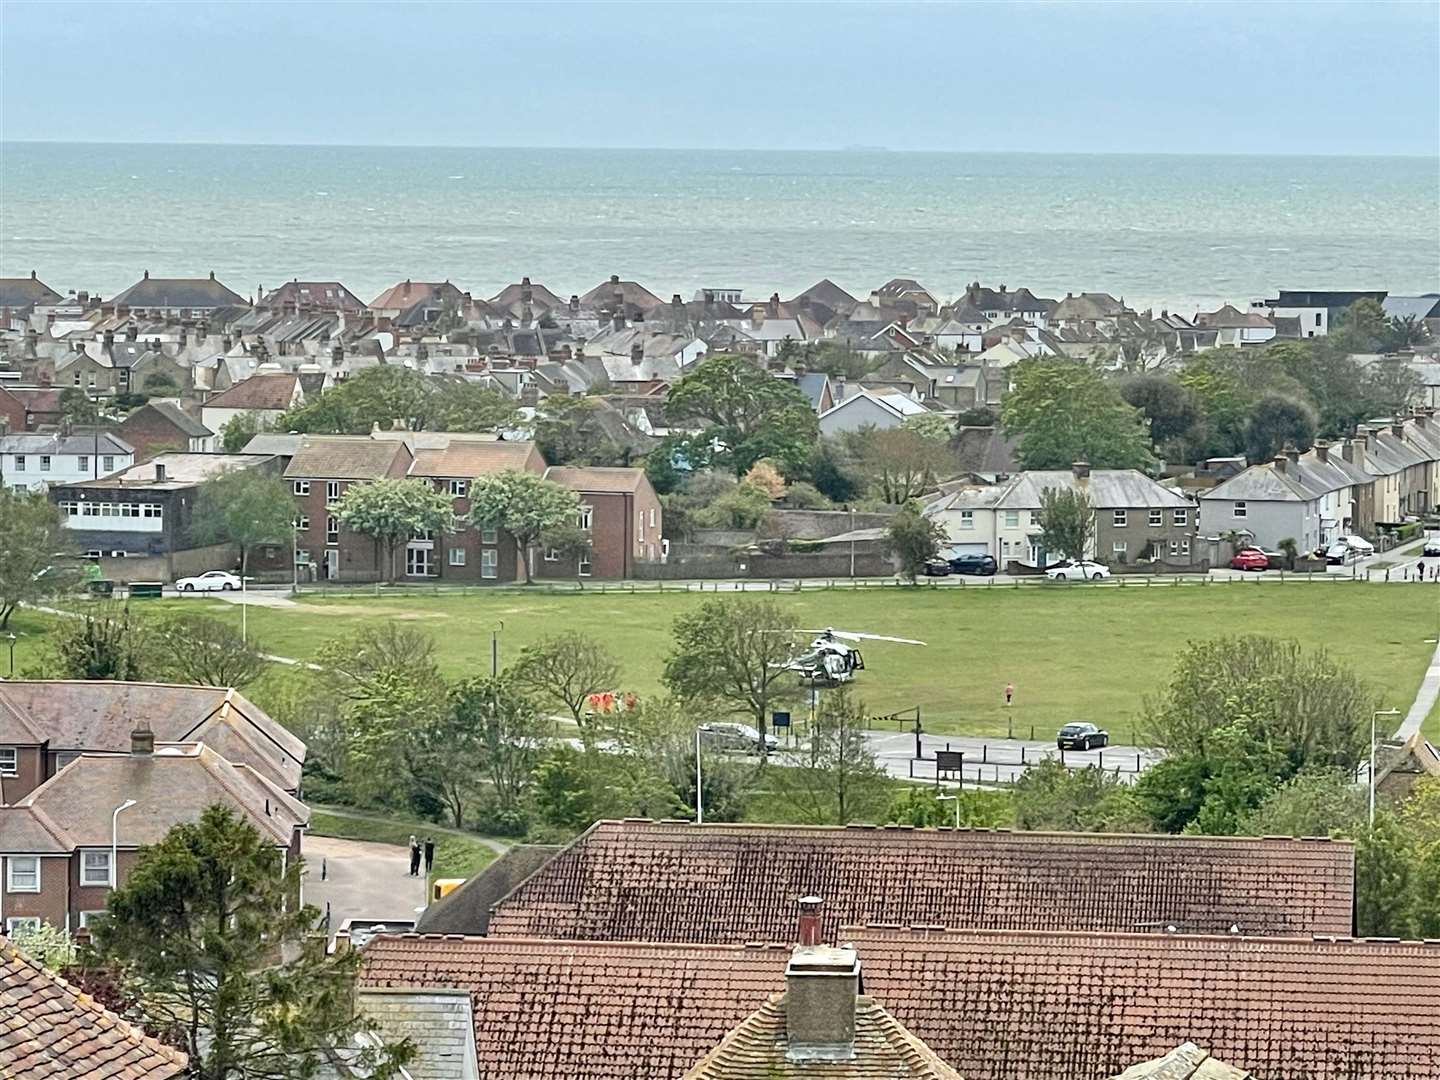 The air ambulance landed on Hythe Green. Picture: © A Tanton / Hythe Residents Group